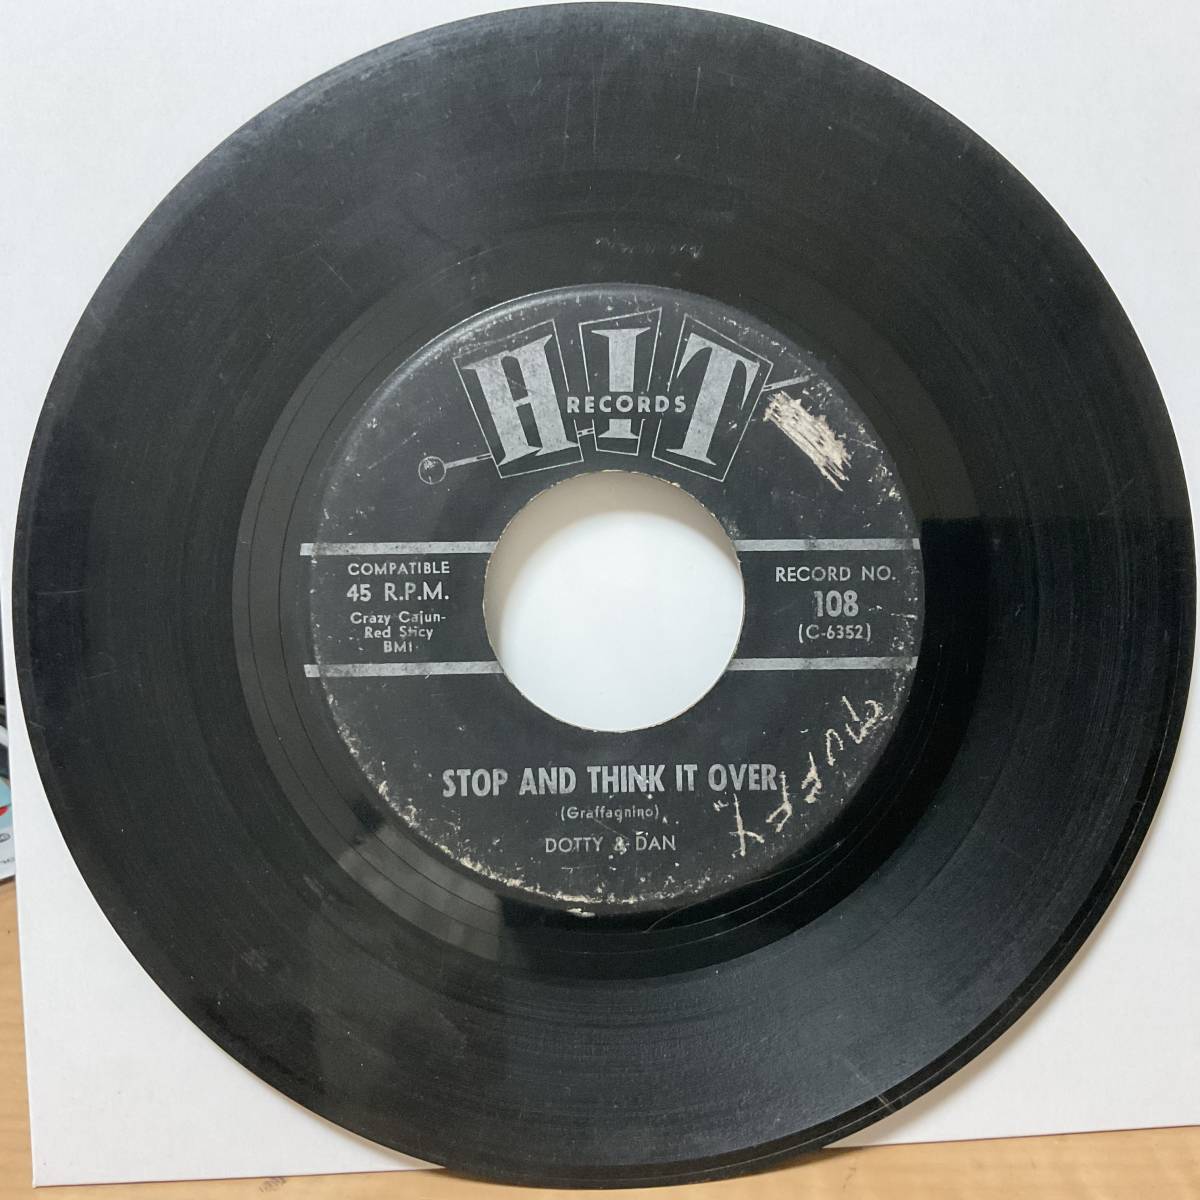 【EP 7インチ レコード】Connie Dee - Navy Blue / Dotty & Dan - Stop And Think It Over 50s60s 視聴_画像2